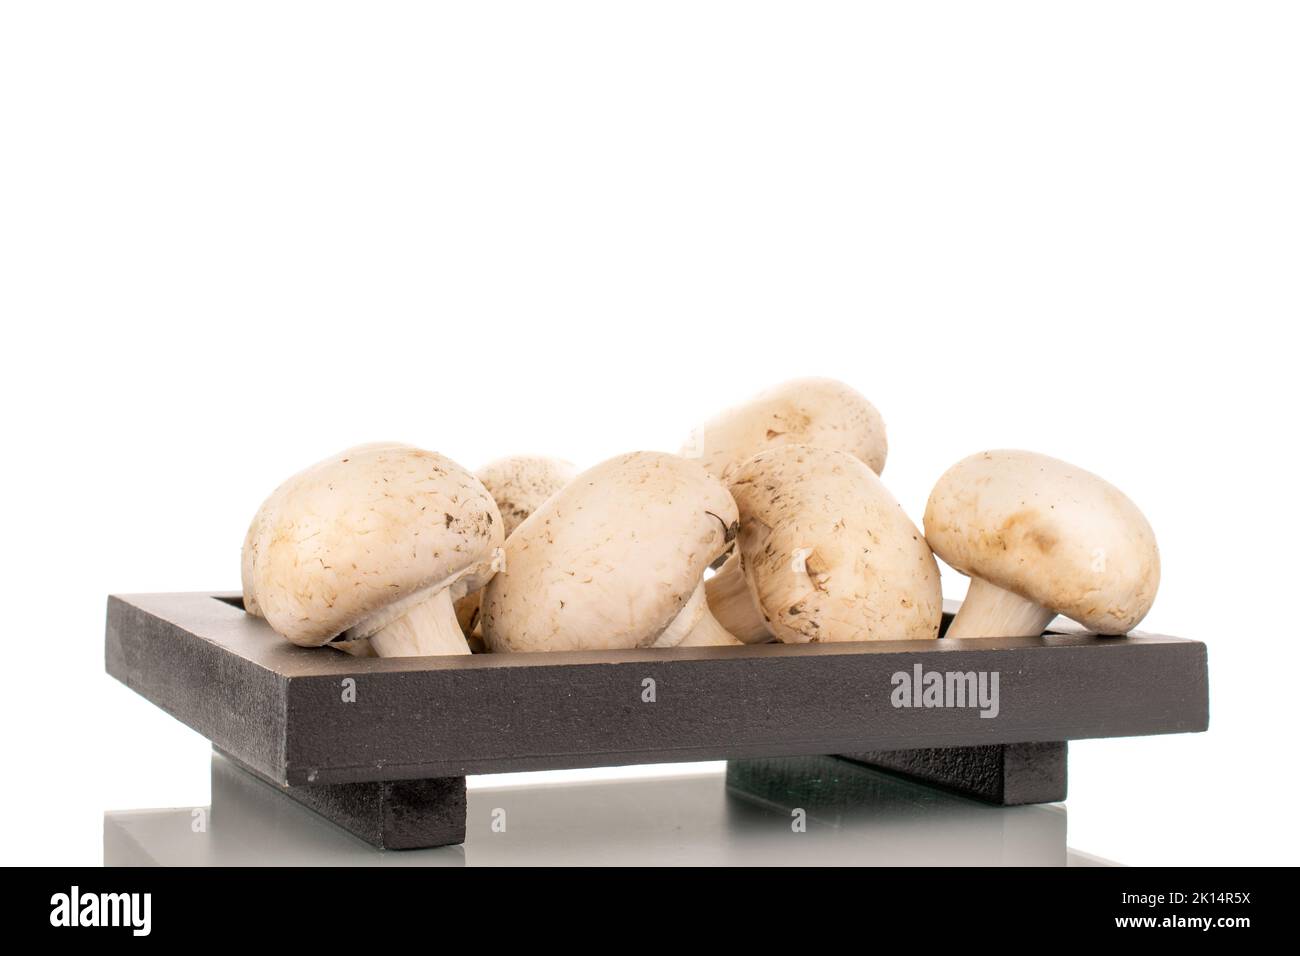 Several fresh mushrooms on a wooden tray, close-up, isolated on a white background. Stock Photo